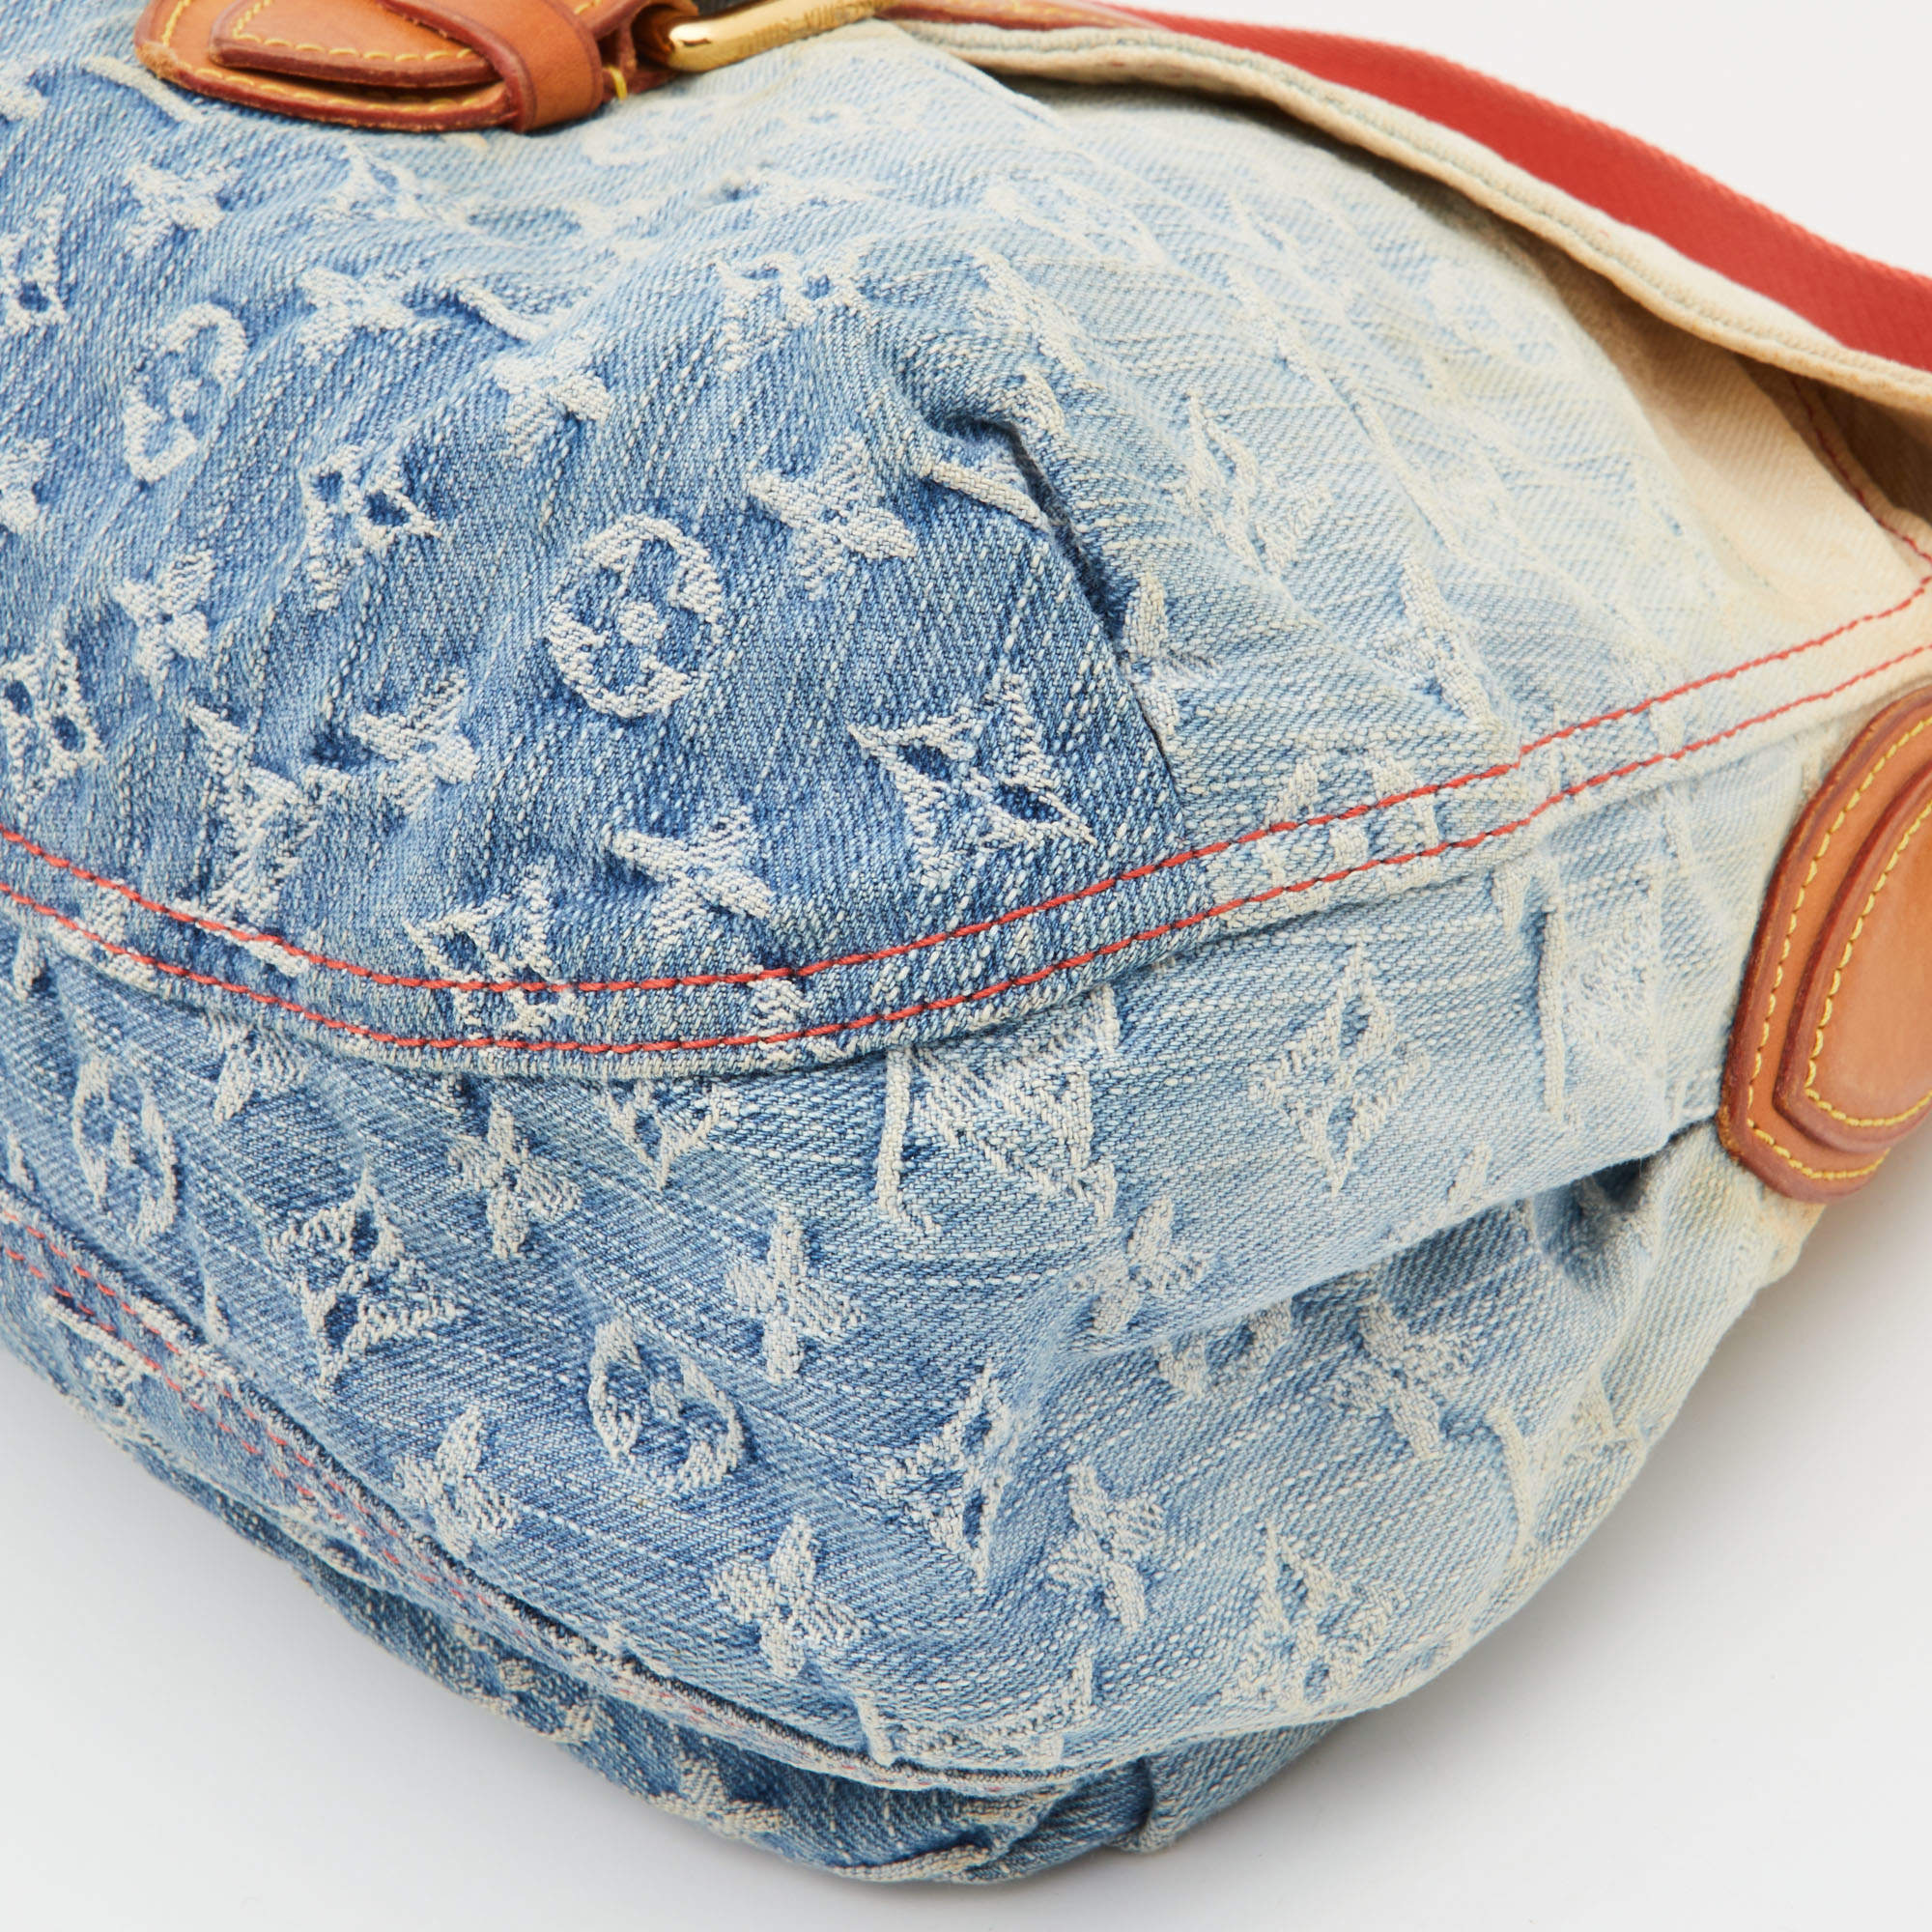 Louis Vuitton Blue Monogram Denim and Leather Limited Edition